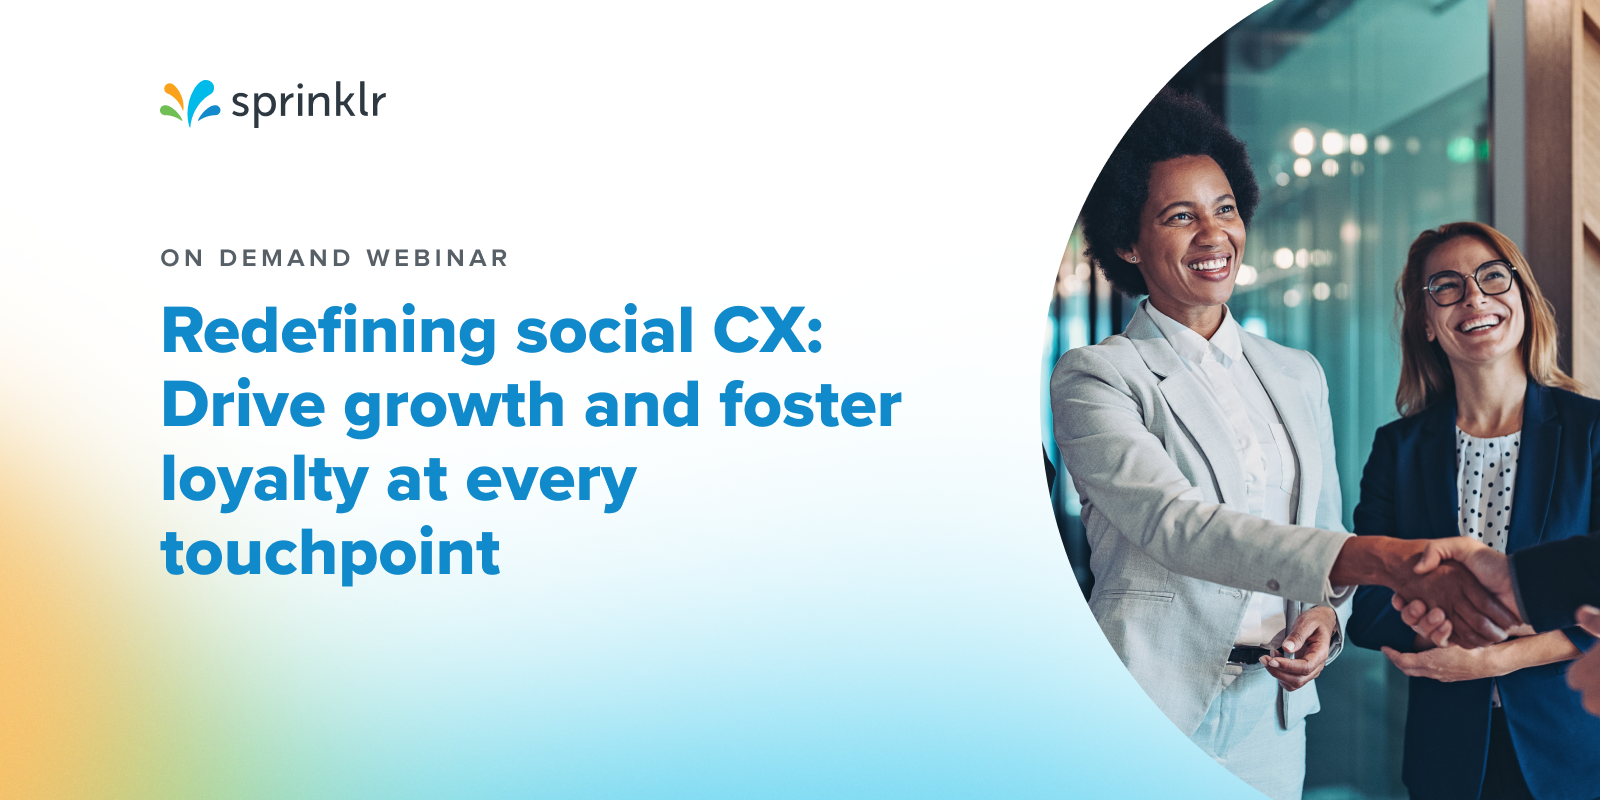 Redefining Social CX: Drive growth and foster loyalty at every touchpoint